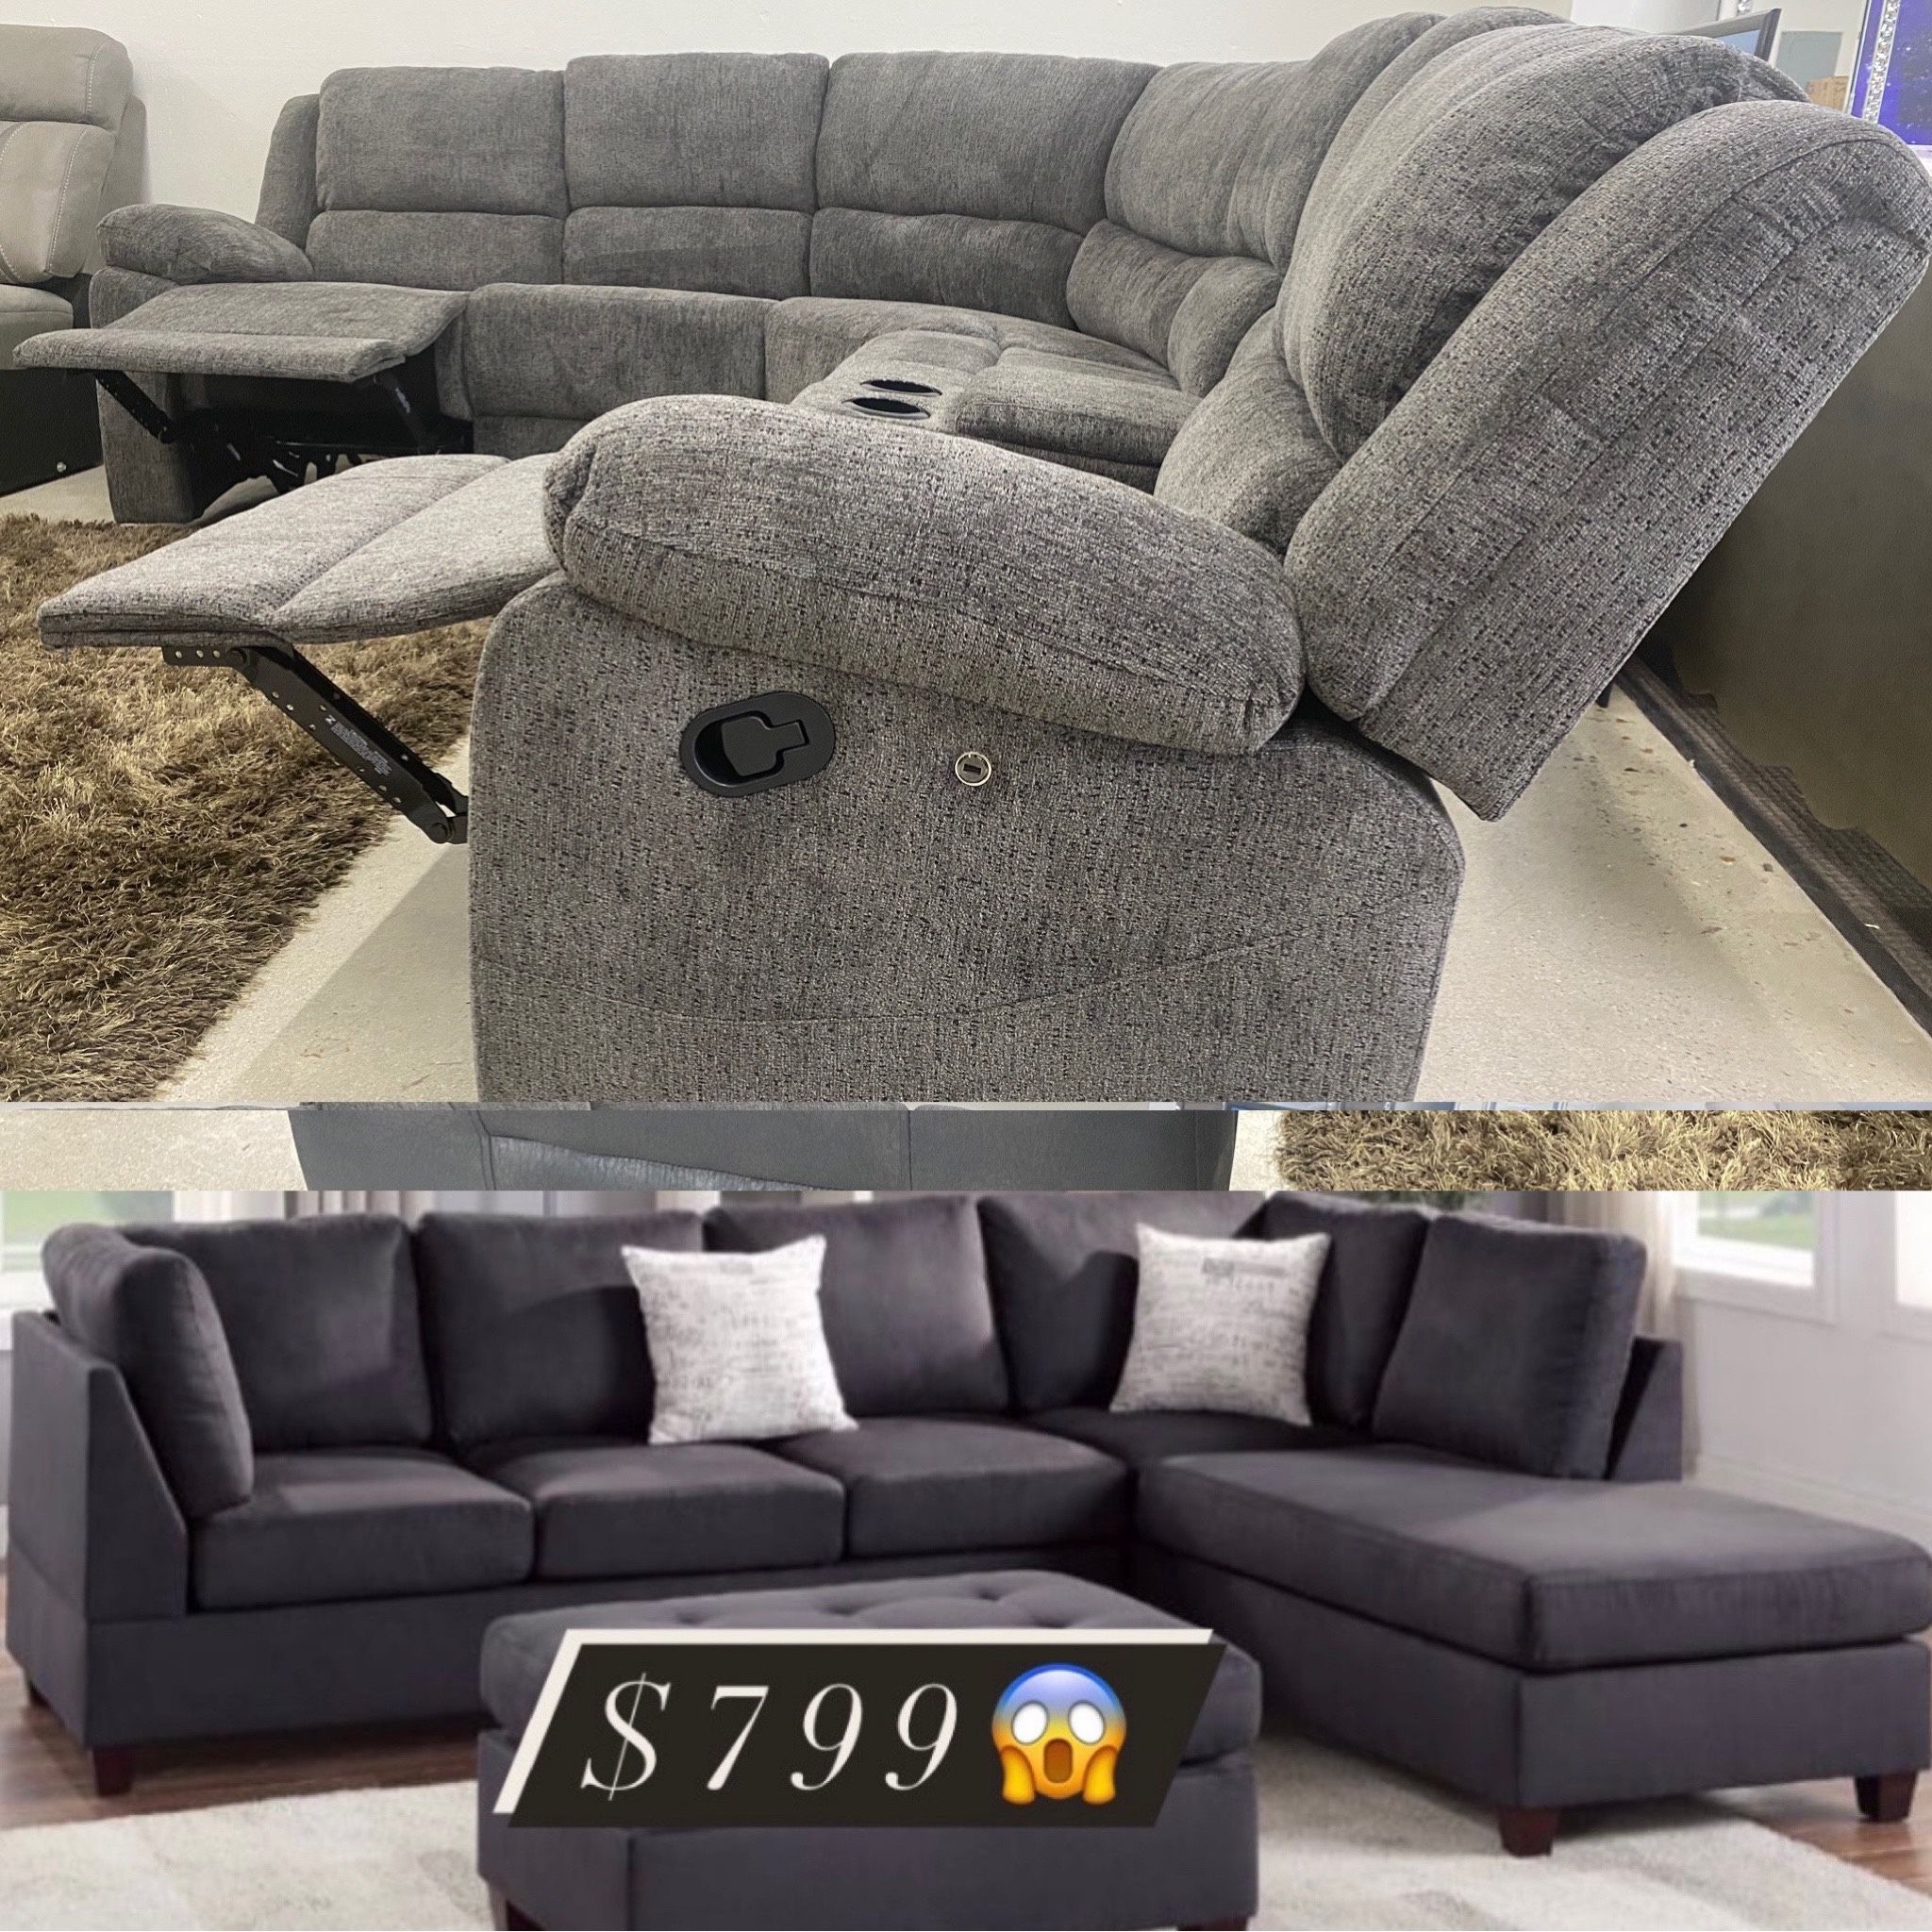 ♥️♥️NEW!! IN STOCK 🚛Delivery Available Sectional BLOWOUT!! Outlet Liquidation!♥️♥️